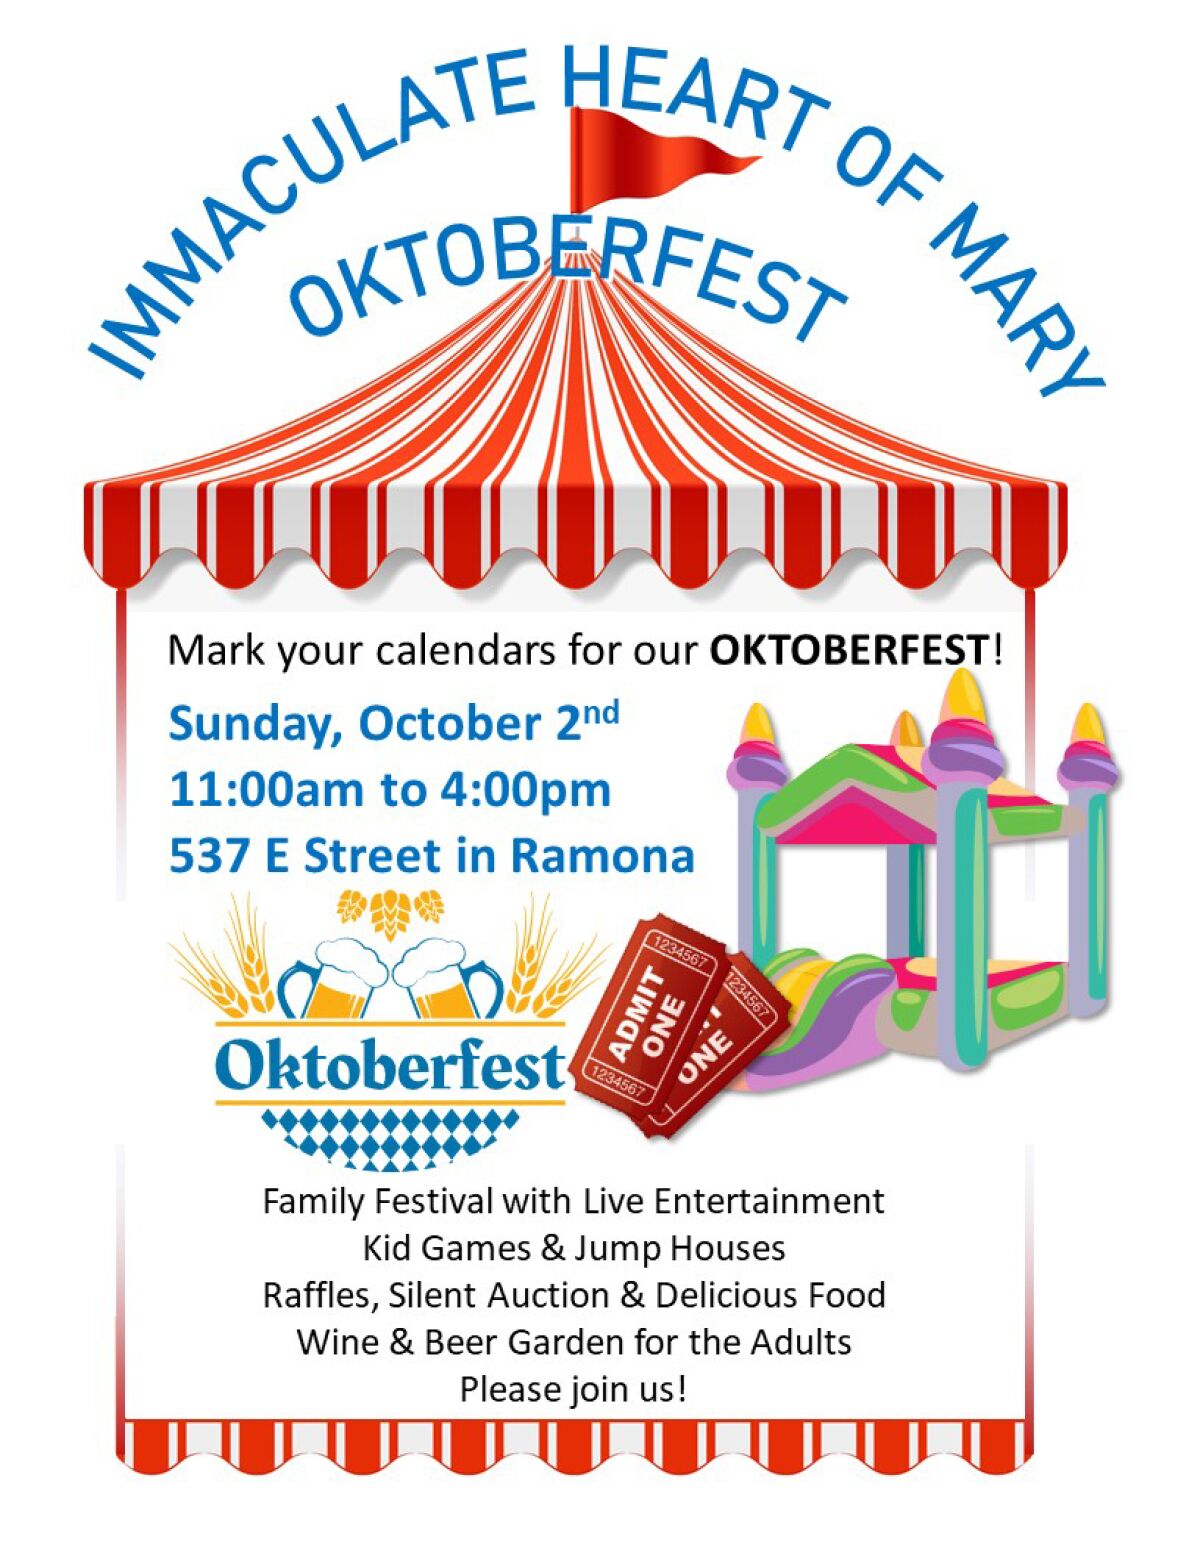 An Oktoberfest will be held at Immaculate Heart of Mary Catholic Church on Sunday, Oct. 2.